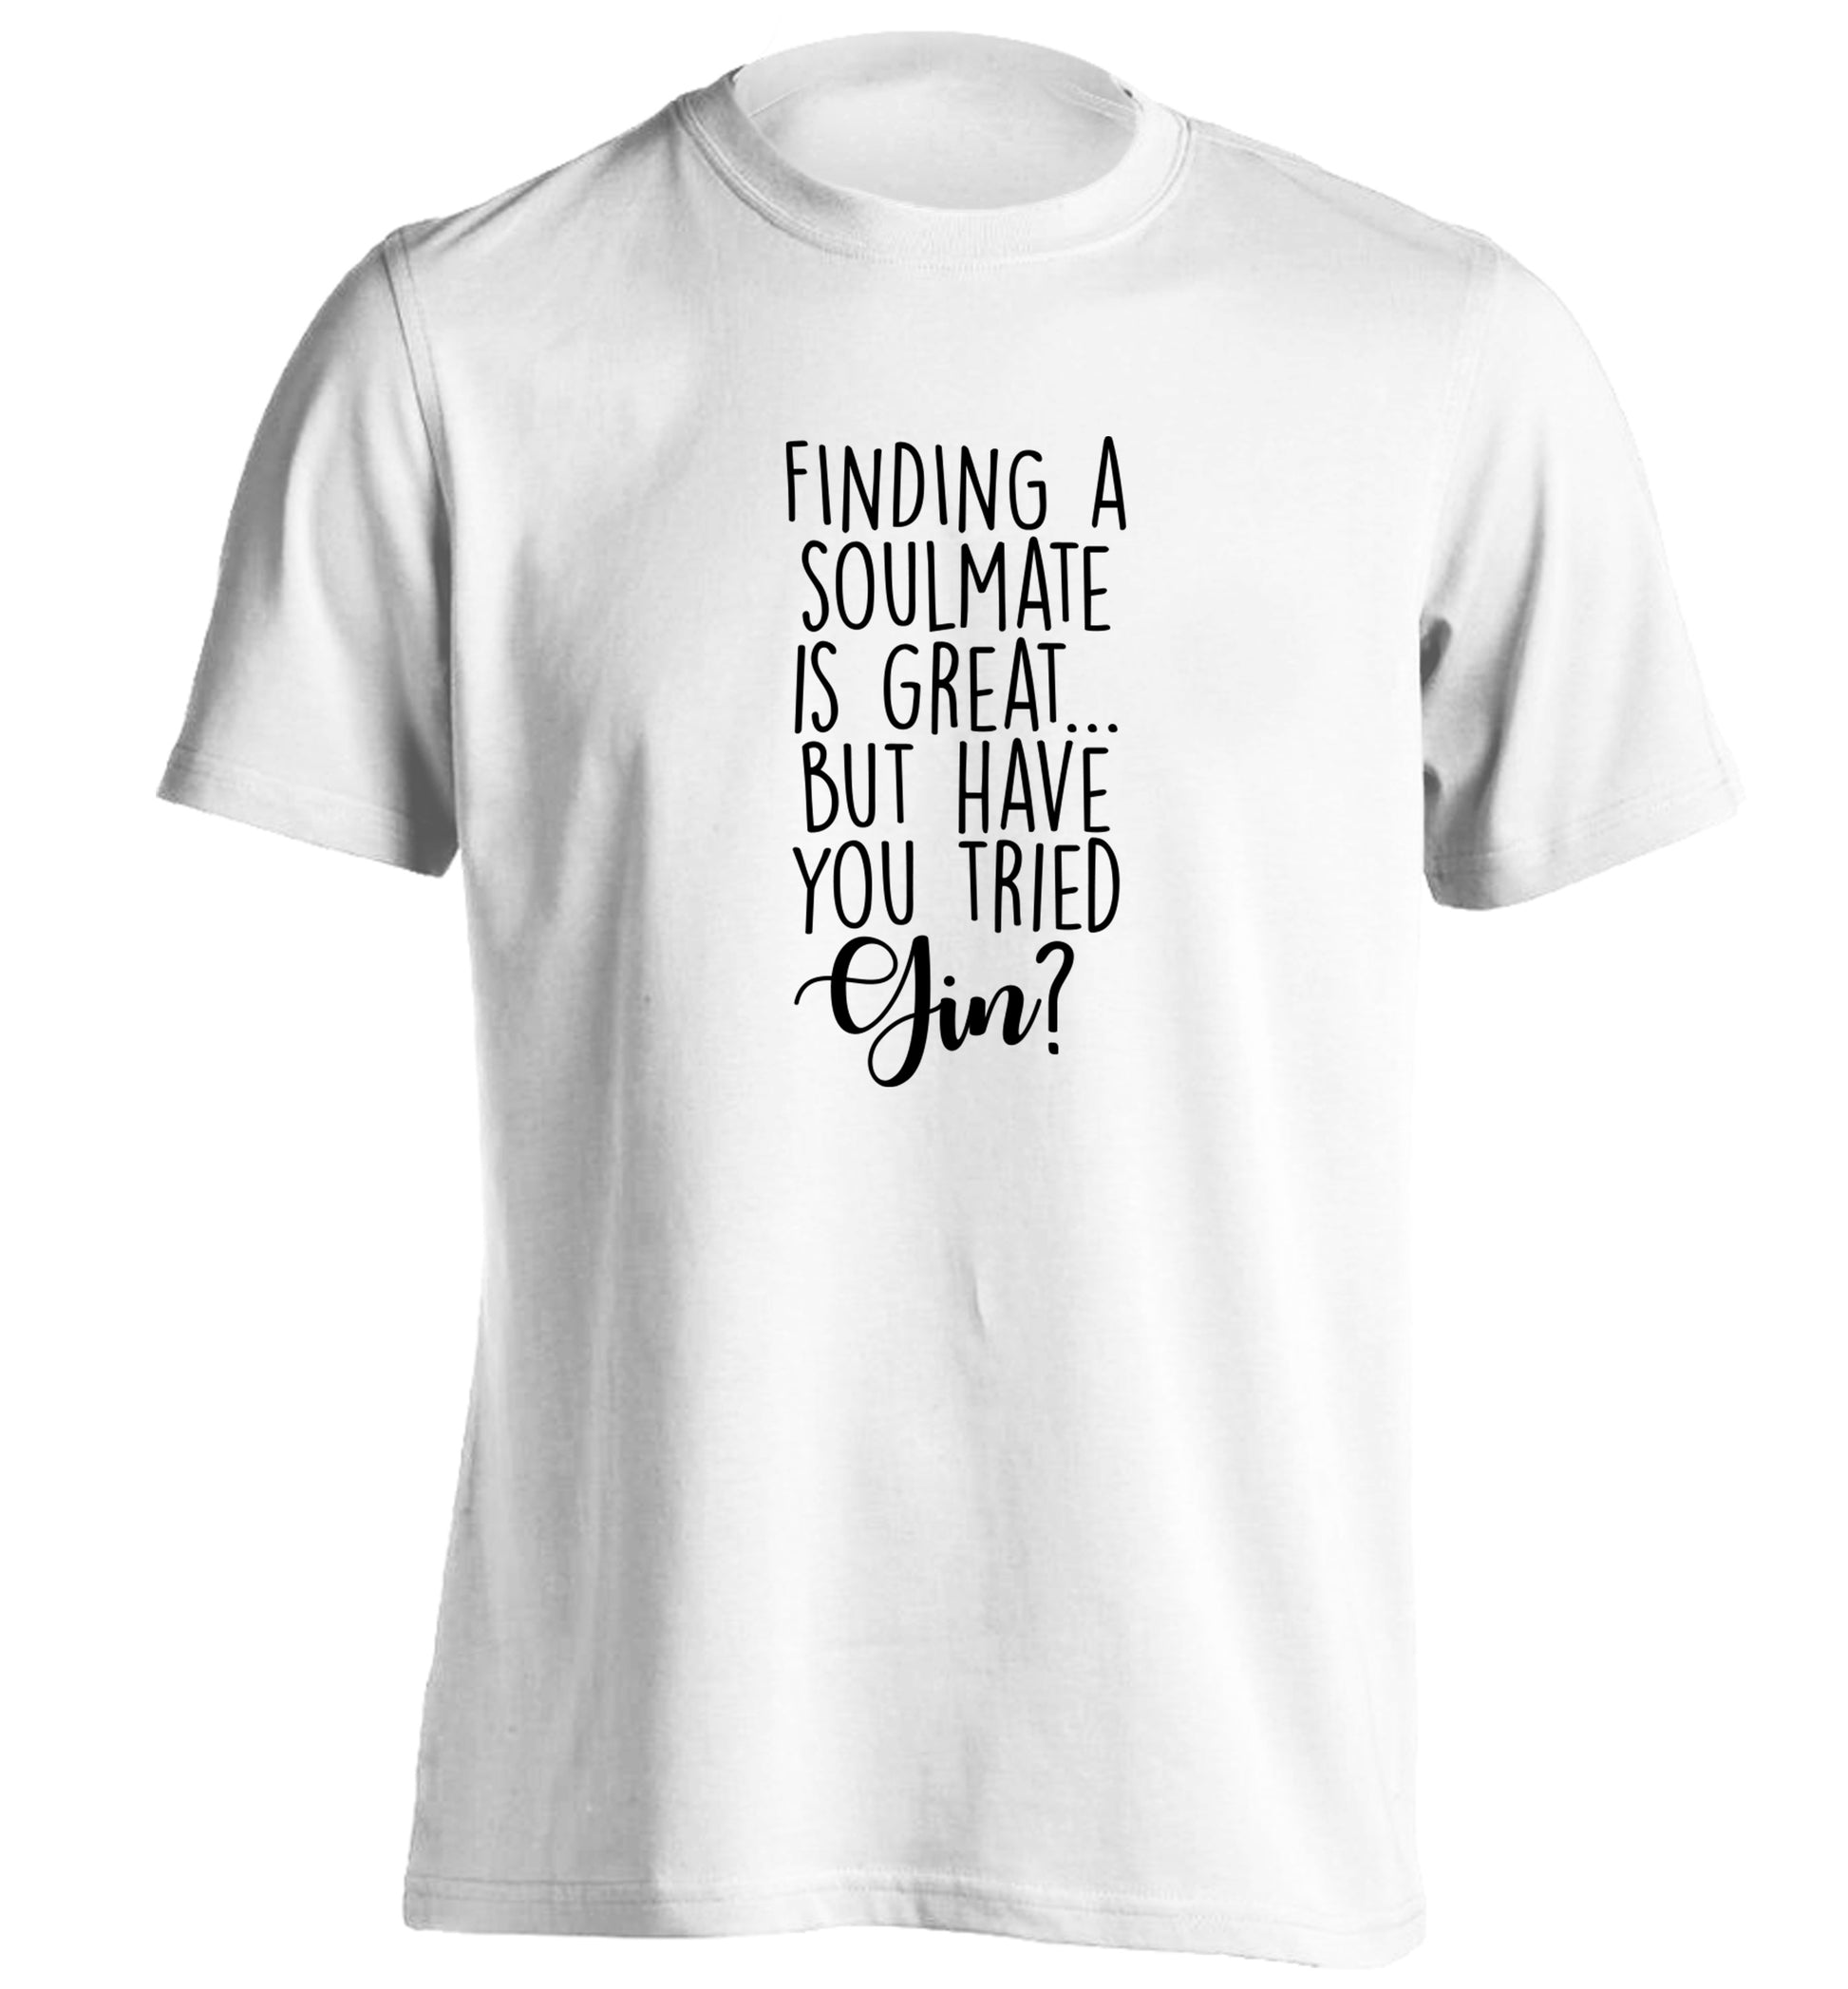 Finding a soulmate is great but have you tried gin? adults unisex white Tshirt 2XL